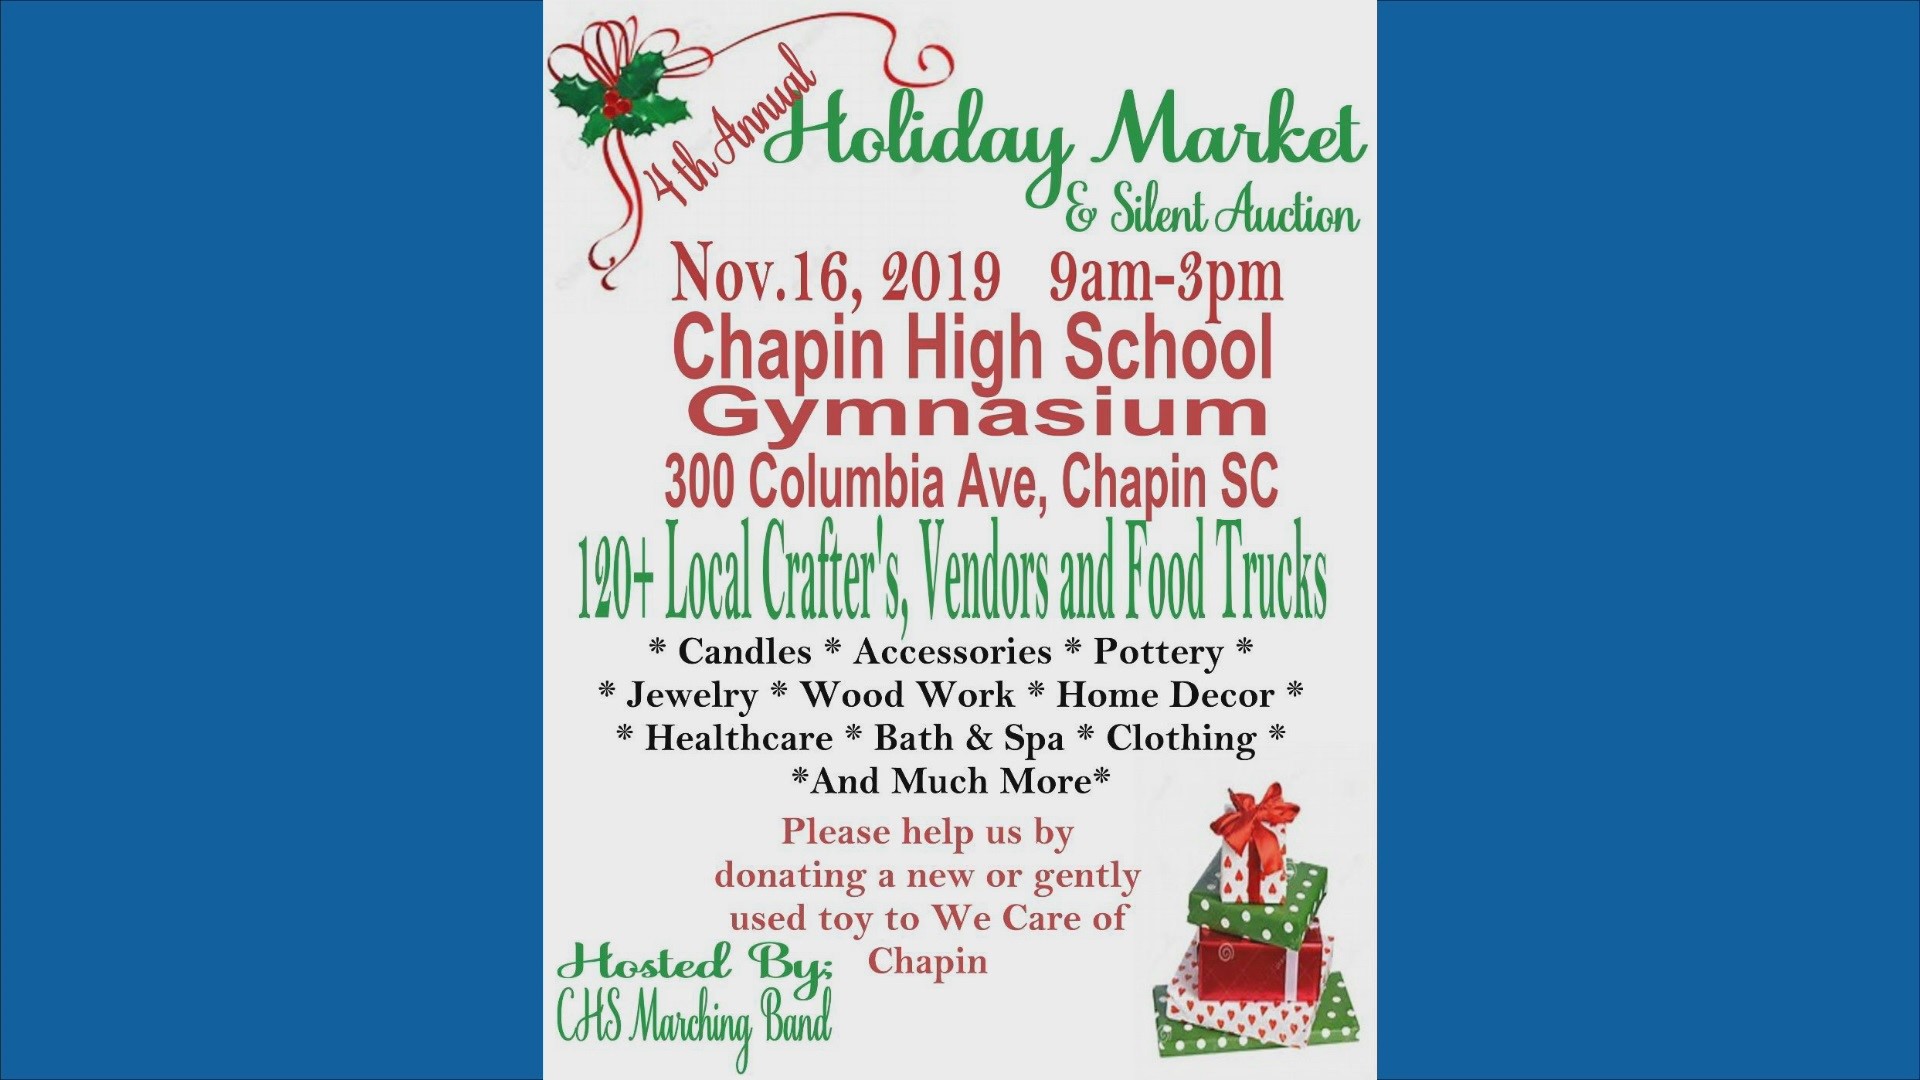 Chapin High School is hosting the 4th annual Holiday Market and Silent Auction on Saturday, November 16, 2019